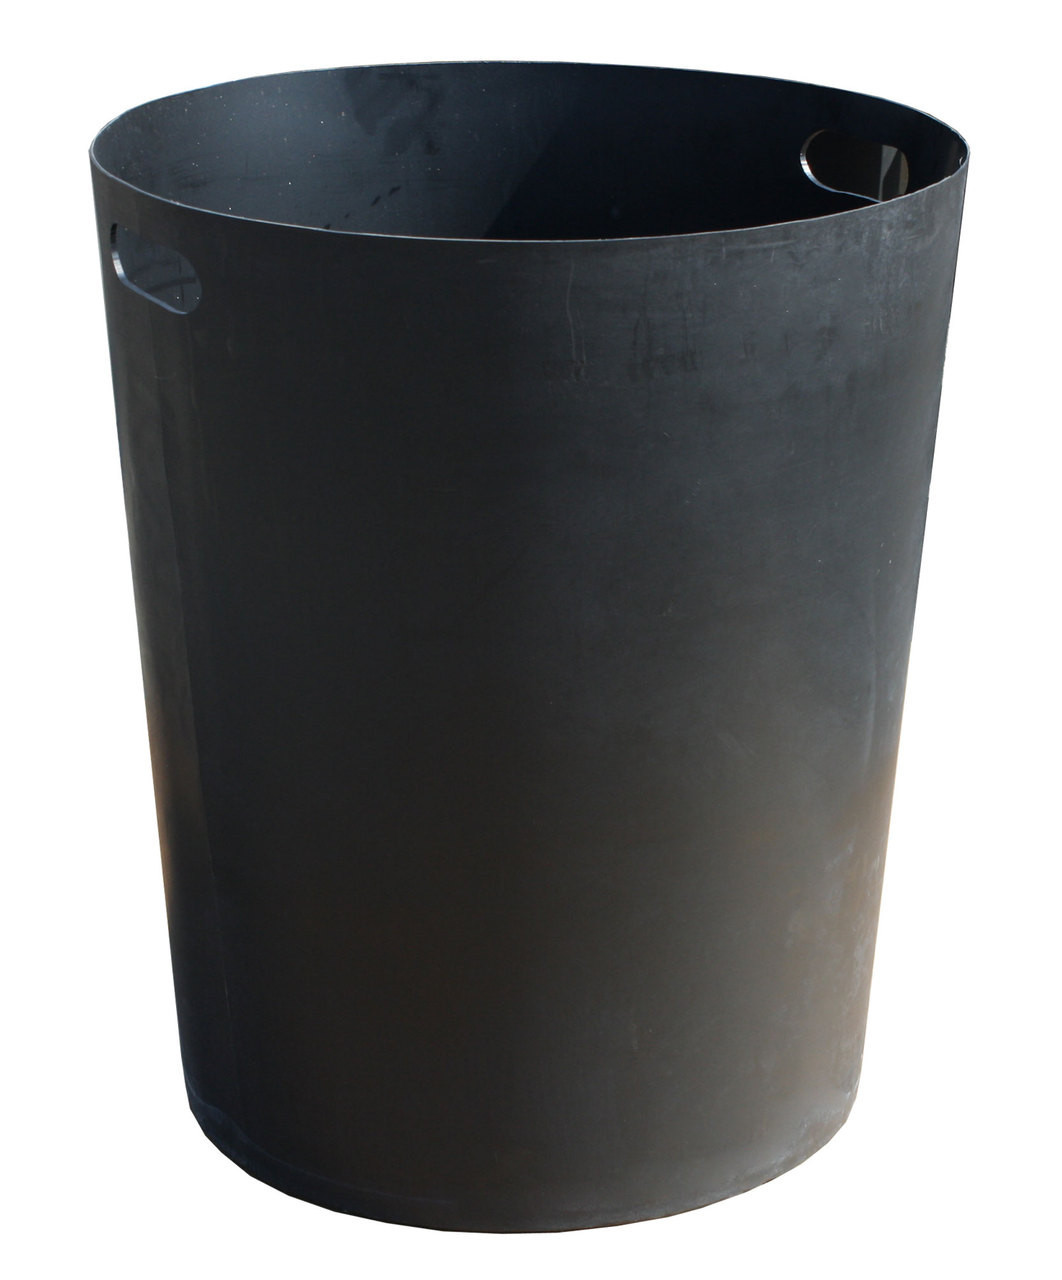 Trash Can Liners 50 Gal 3 mil Grey - #190679